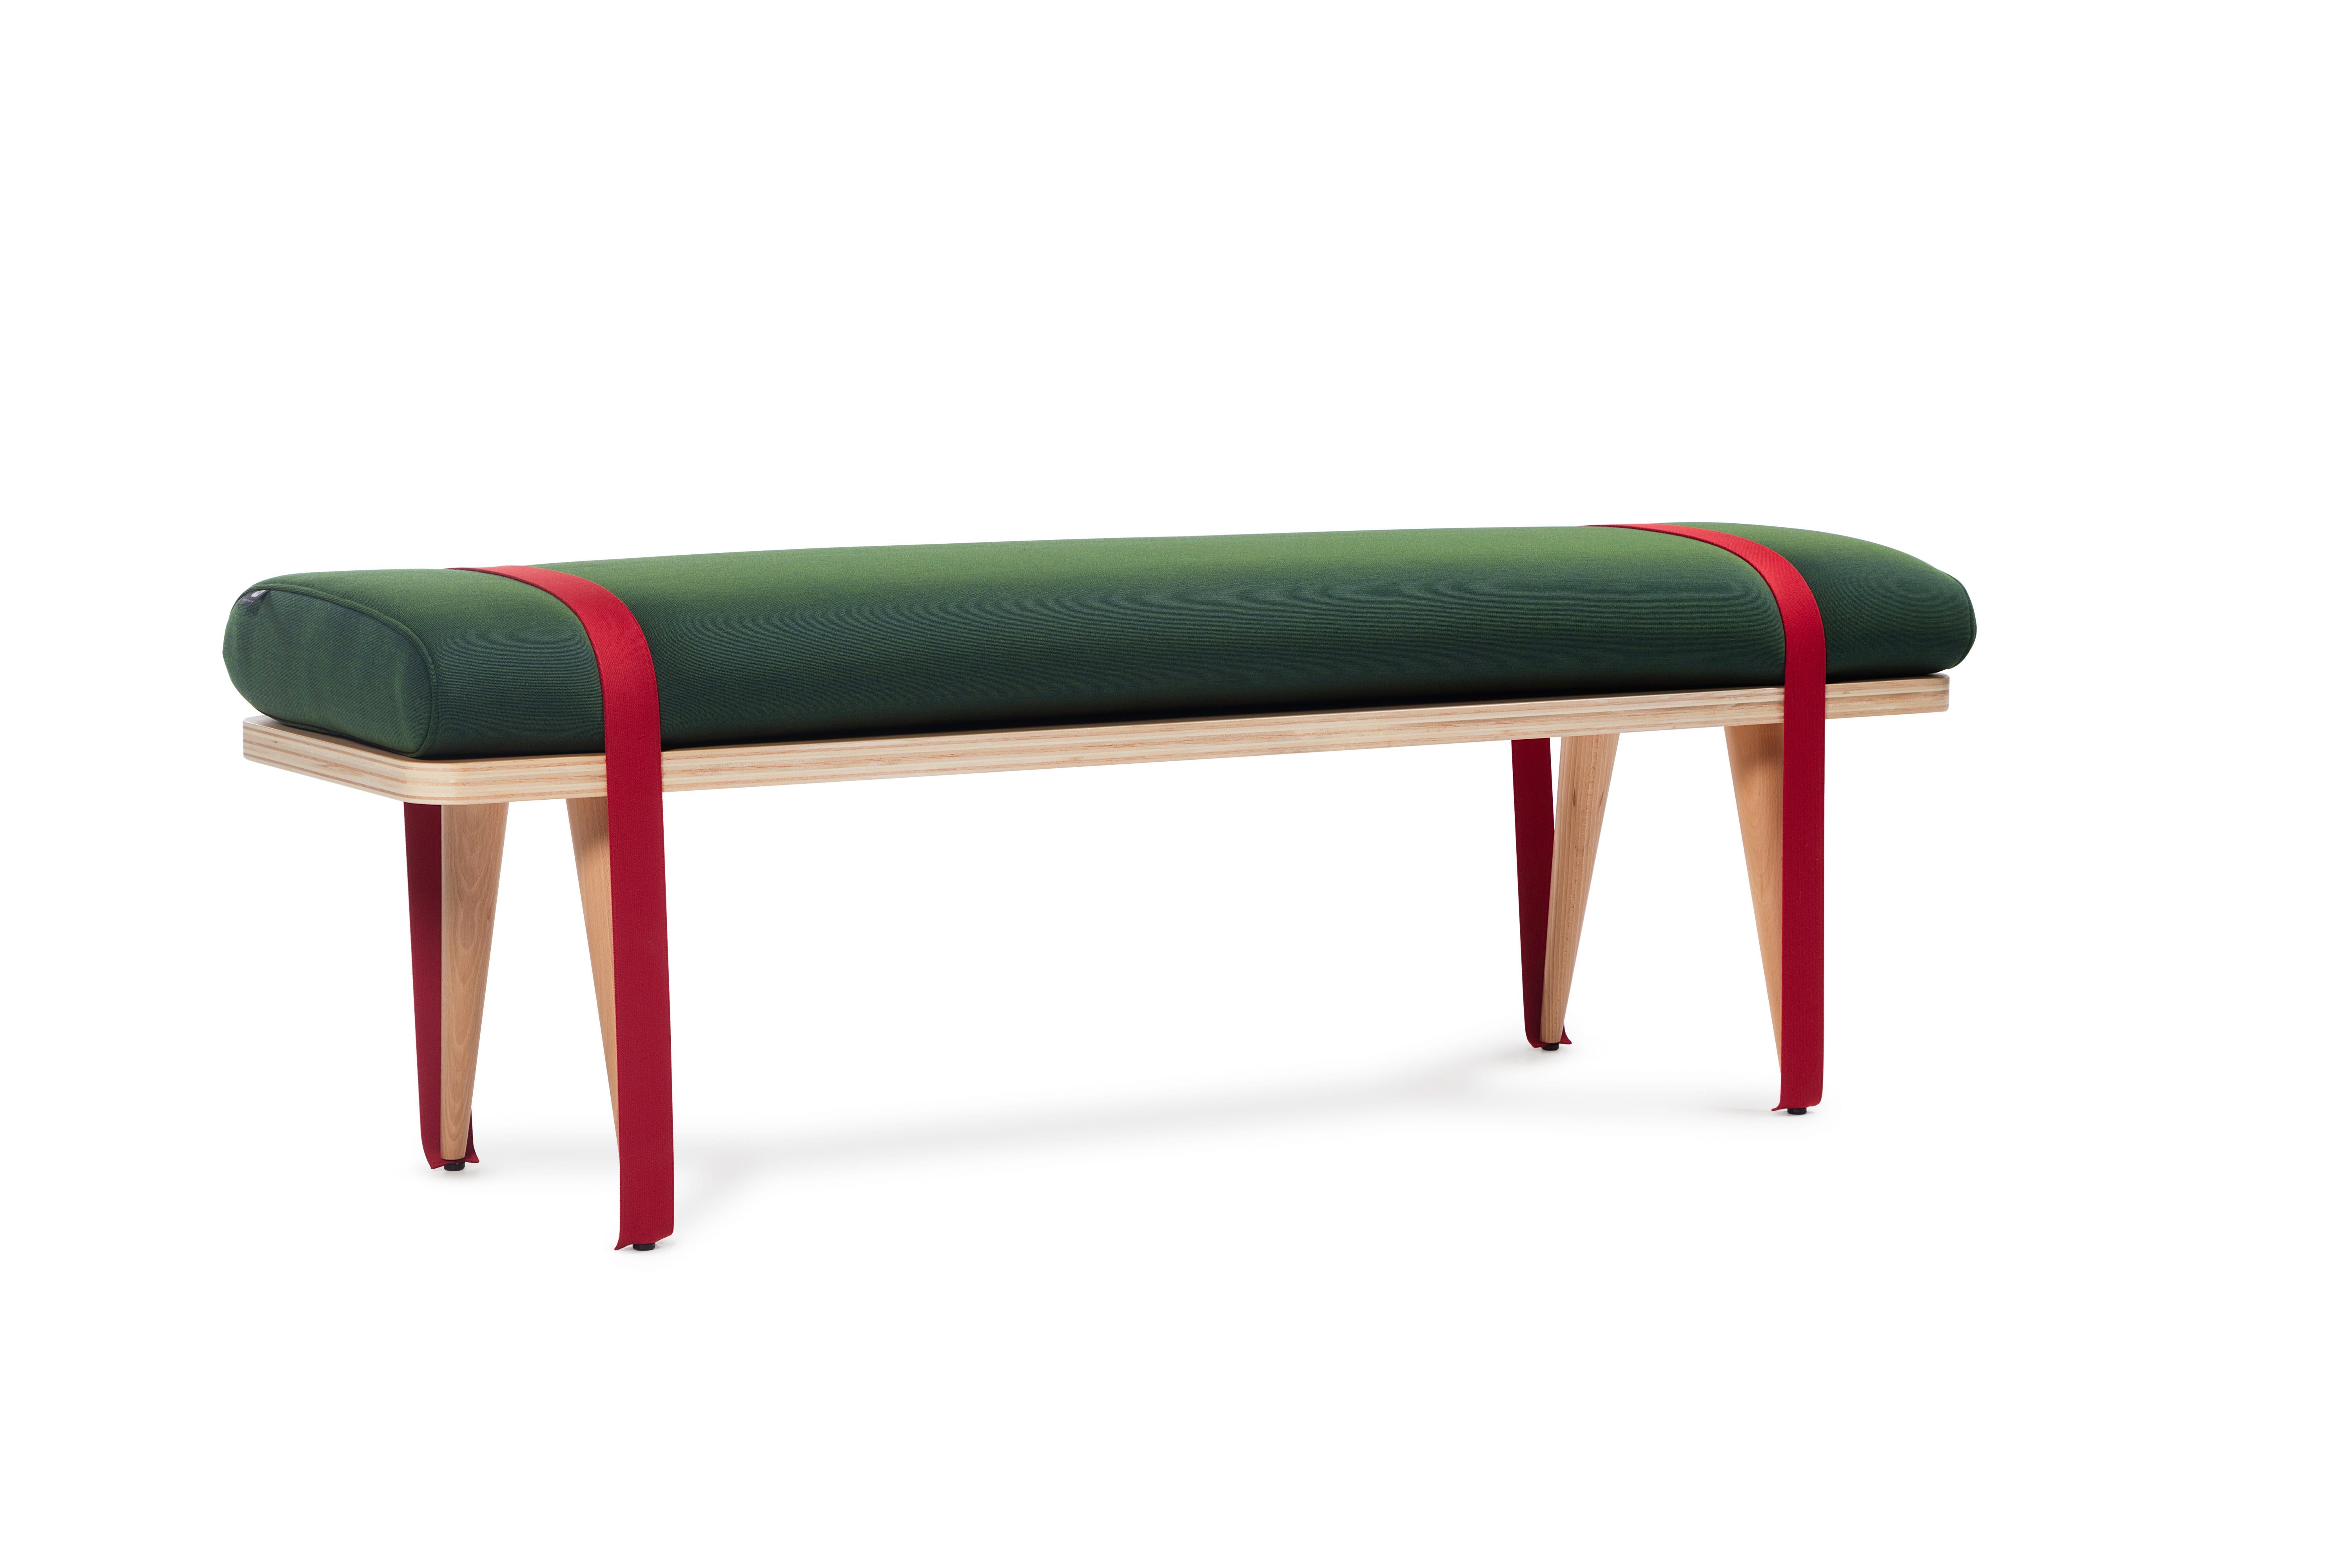 Spanish RS Barcelona On the Road Bench in Peacock Fabric by Stone Designs For Sale